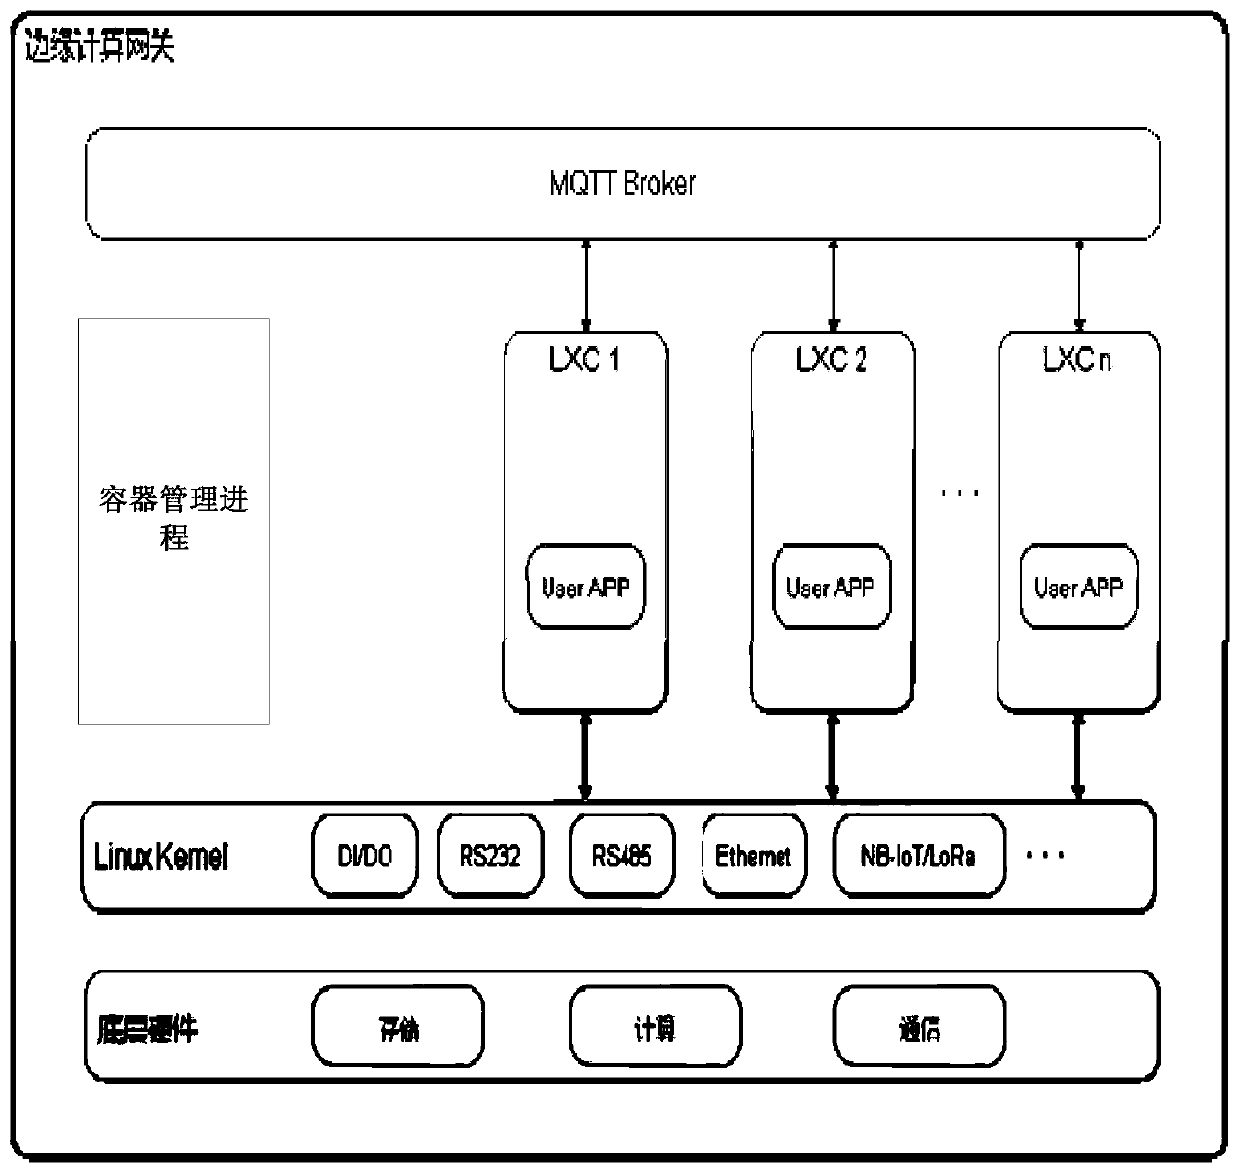 Edge computing gateway management system and method based on LXC container technology